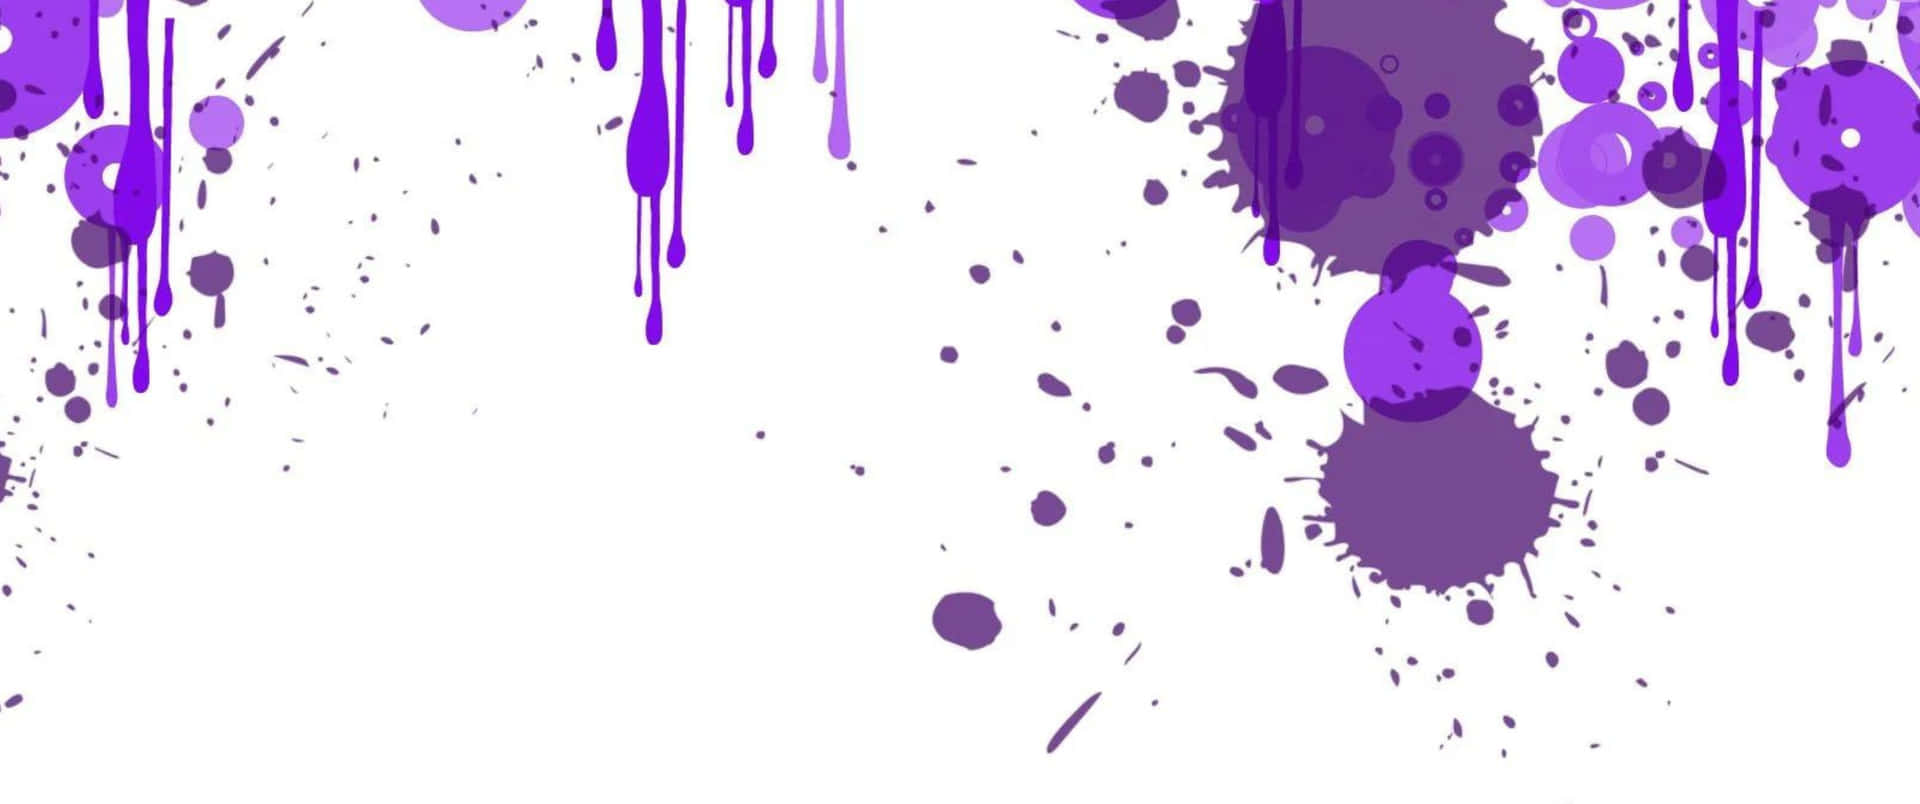 A Vibrant Purple and White Abstract Background